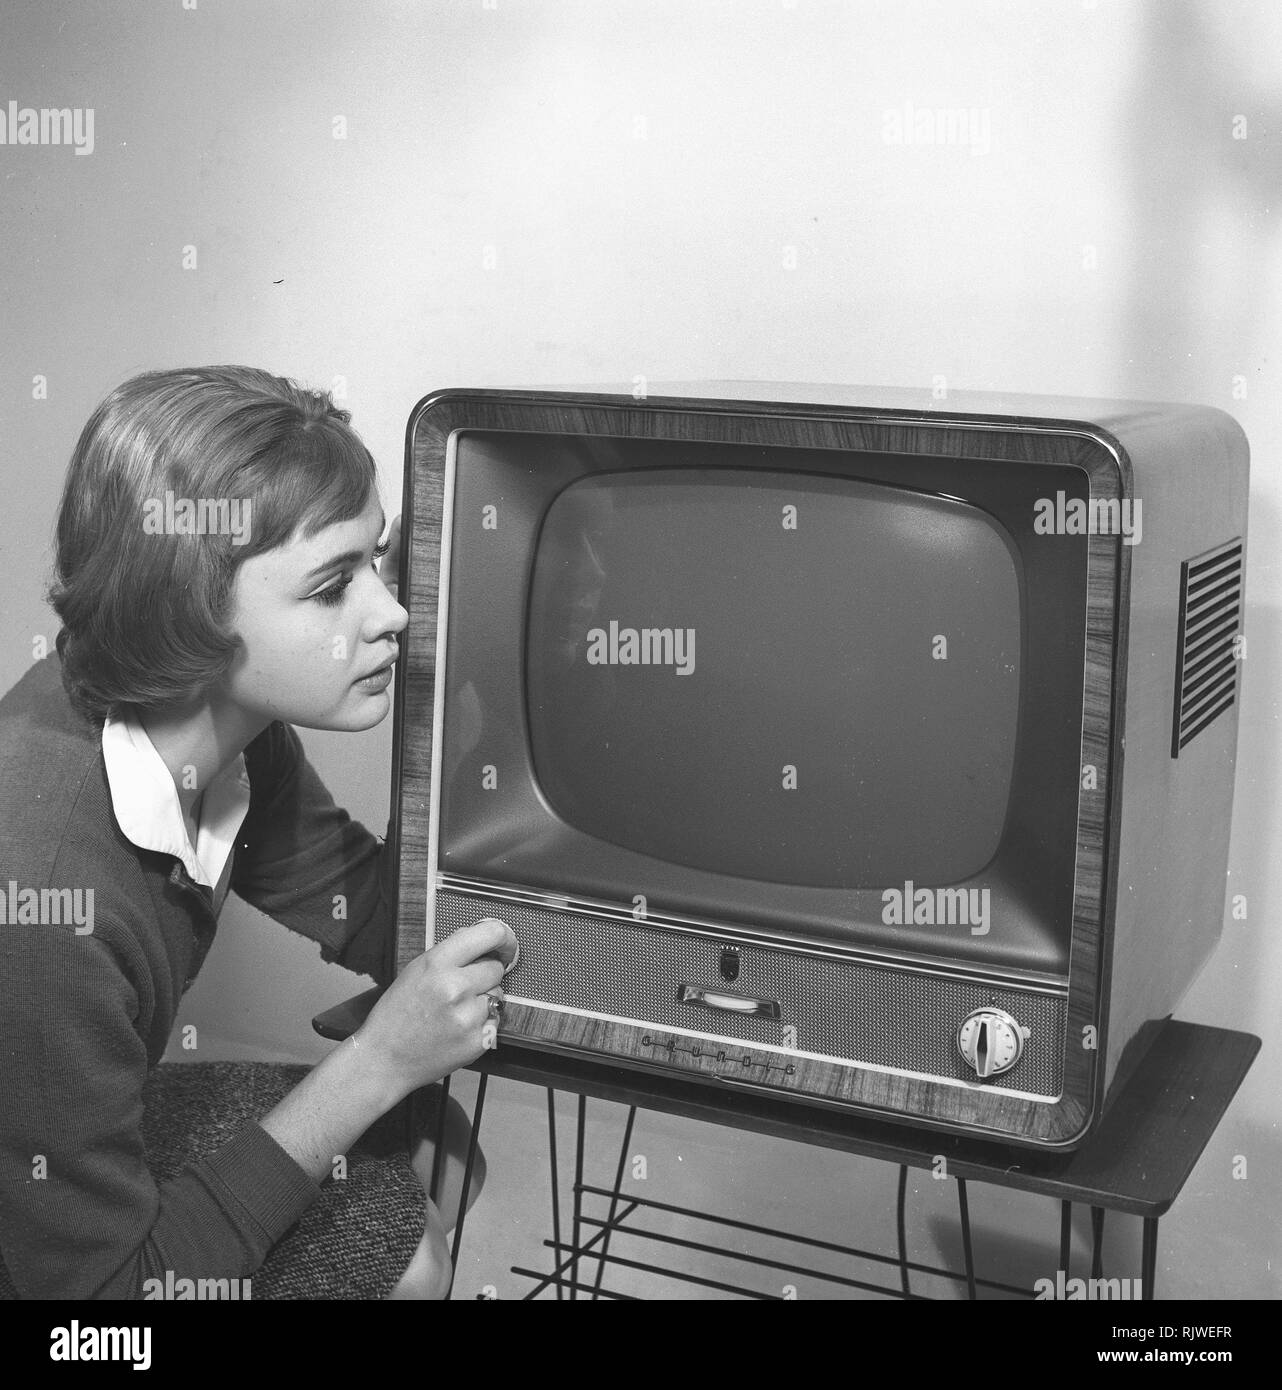 Television in the 1950s. A young woman is pictured beside a typical 50s television set. A Grundig tv standing on a typical metal string boned tv table.  Photo Kristoffersson ref CC93-2. Sweden 1958 Stock Photo